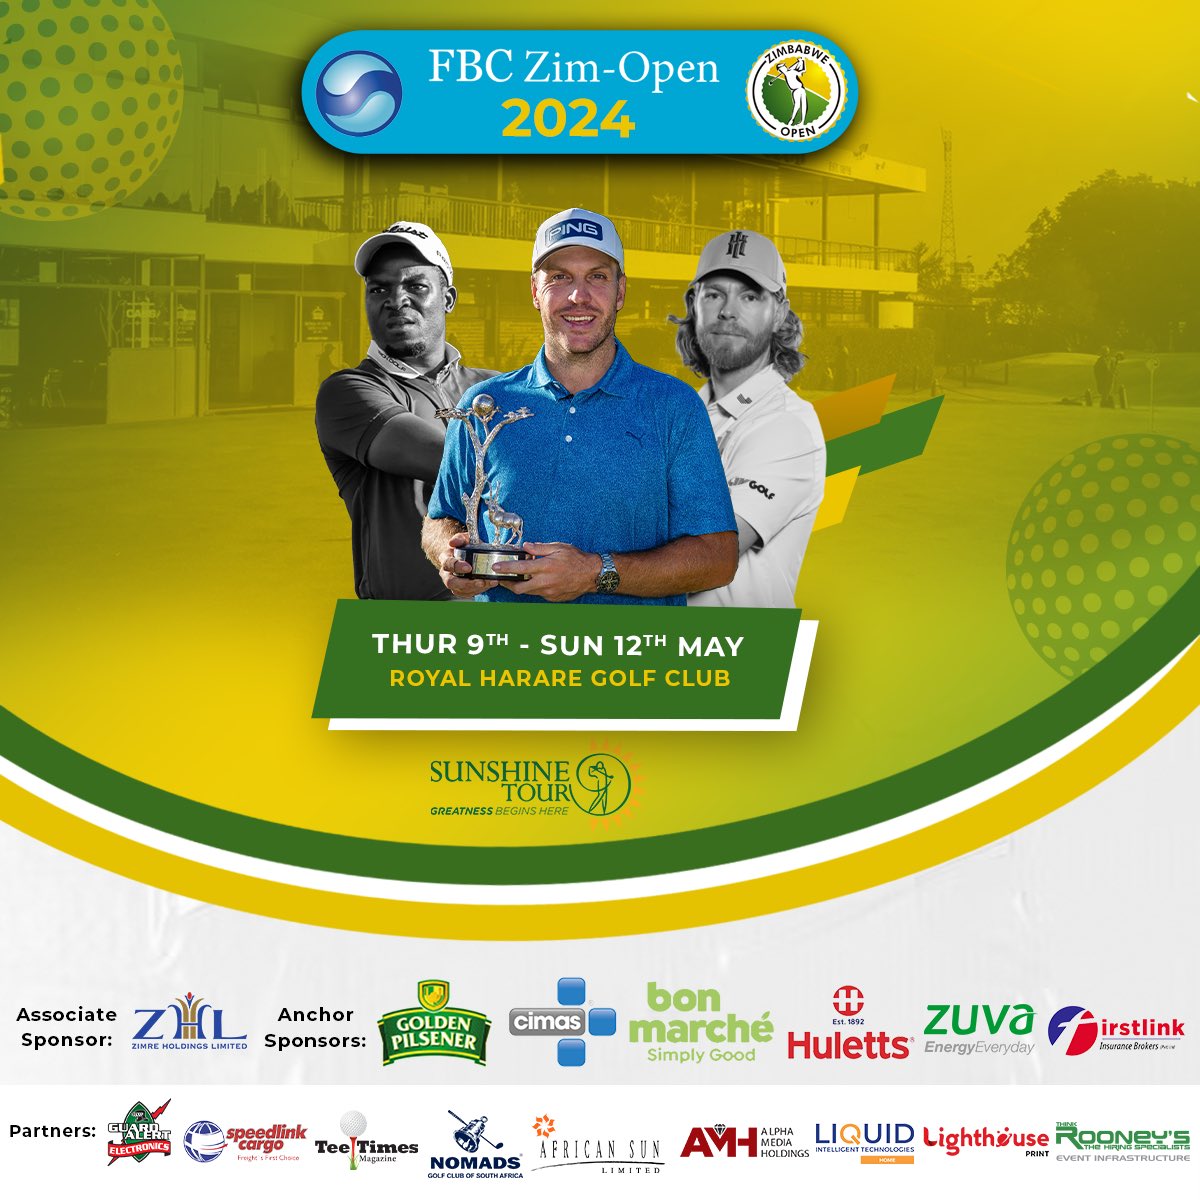 The Zim Open, in partnership with the @Sunshine_Tour proudly presents the premier golf tournament, the @FBCHoldings Zim Open 2024. The tournament tees off for an incredible 4 days at the @RoyalHarareGolf from the 9th - 12th of May 2024. We’ll see you on the green! #zimgolf